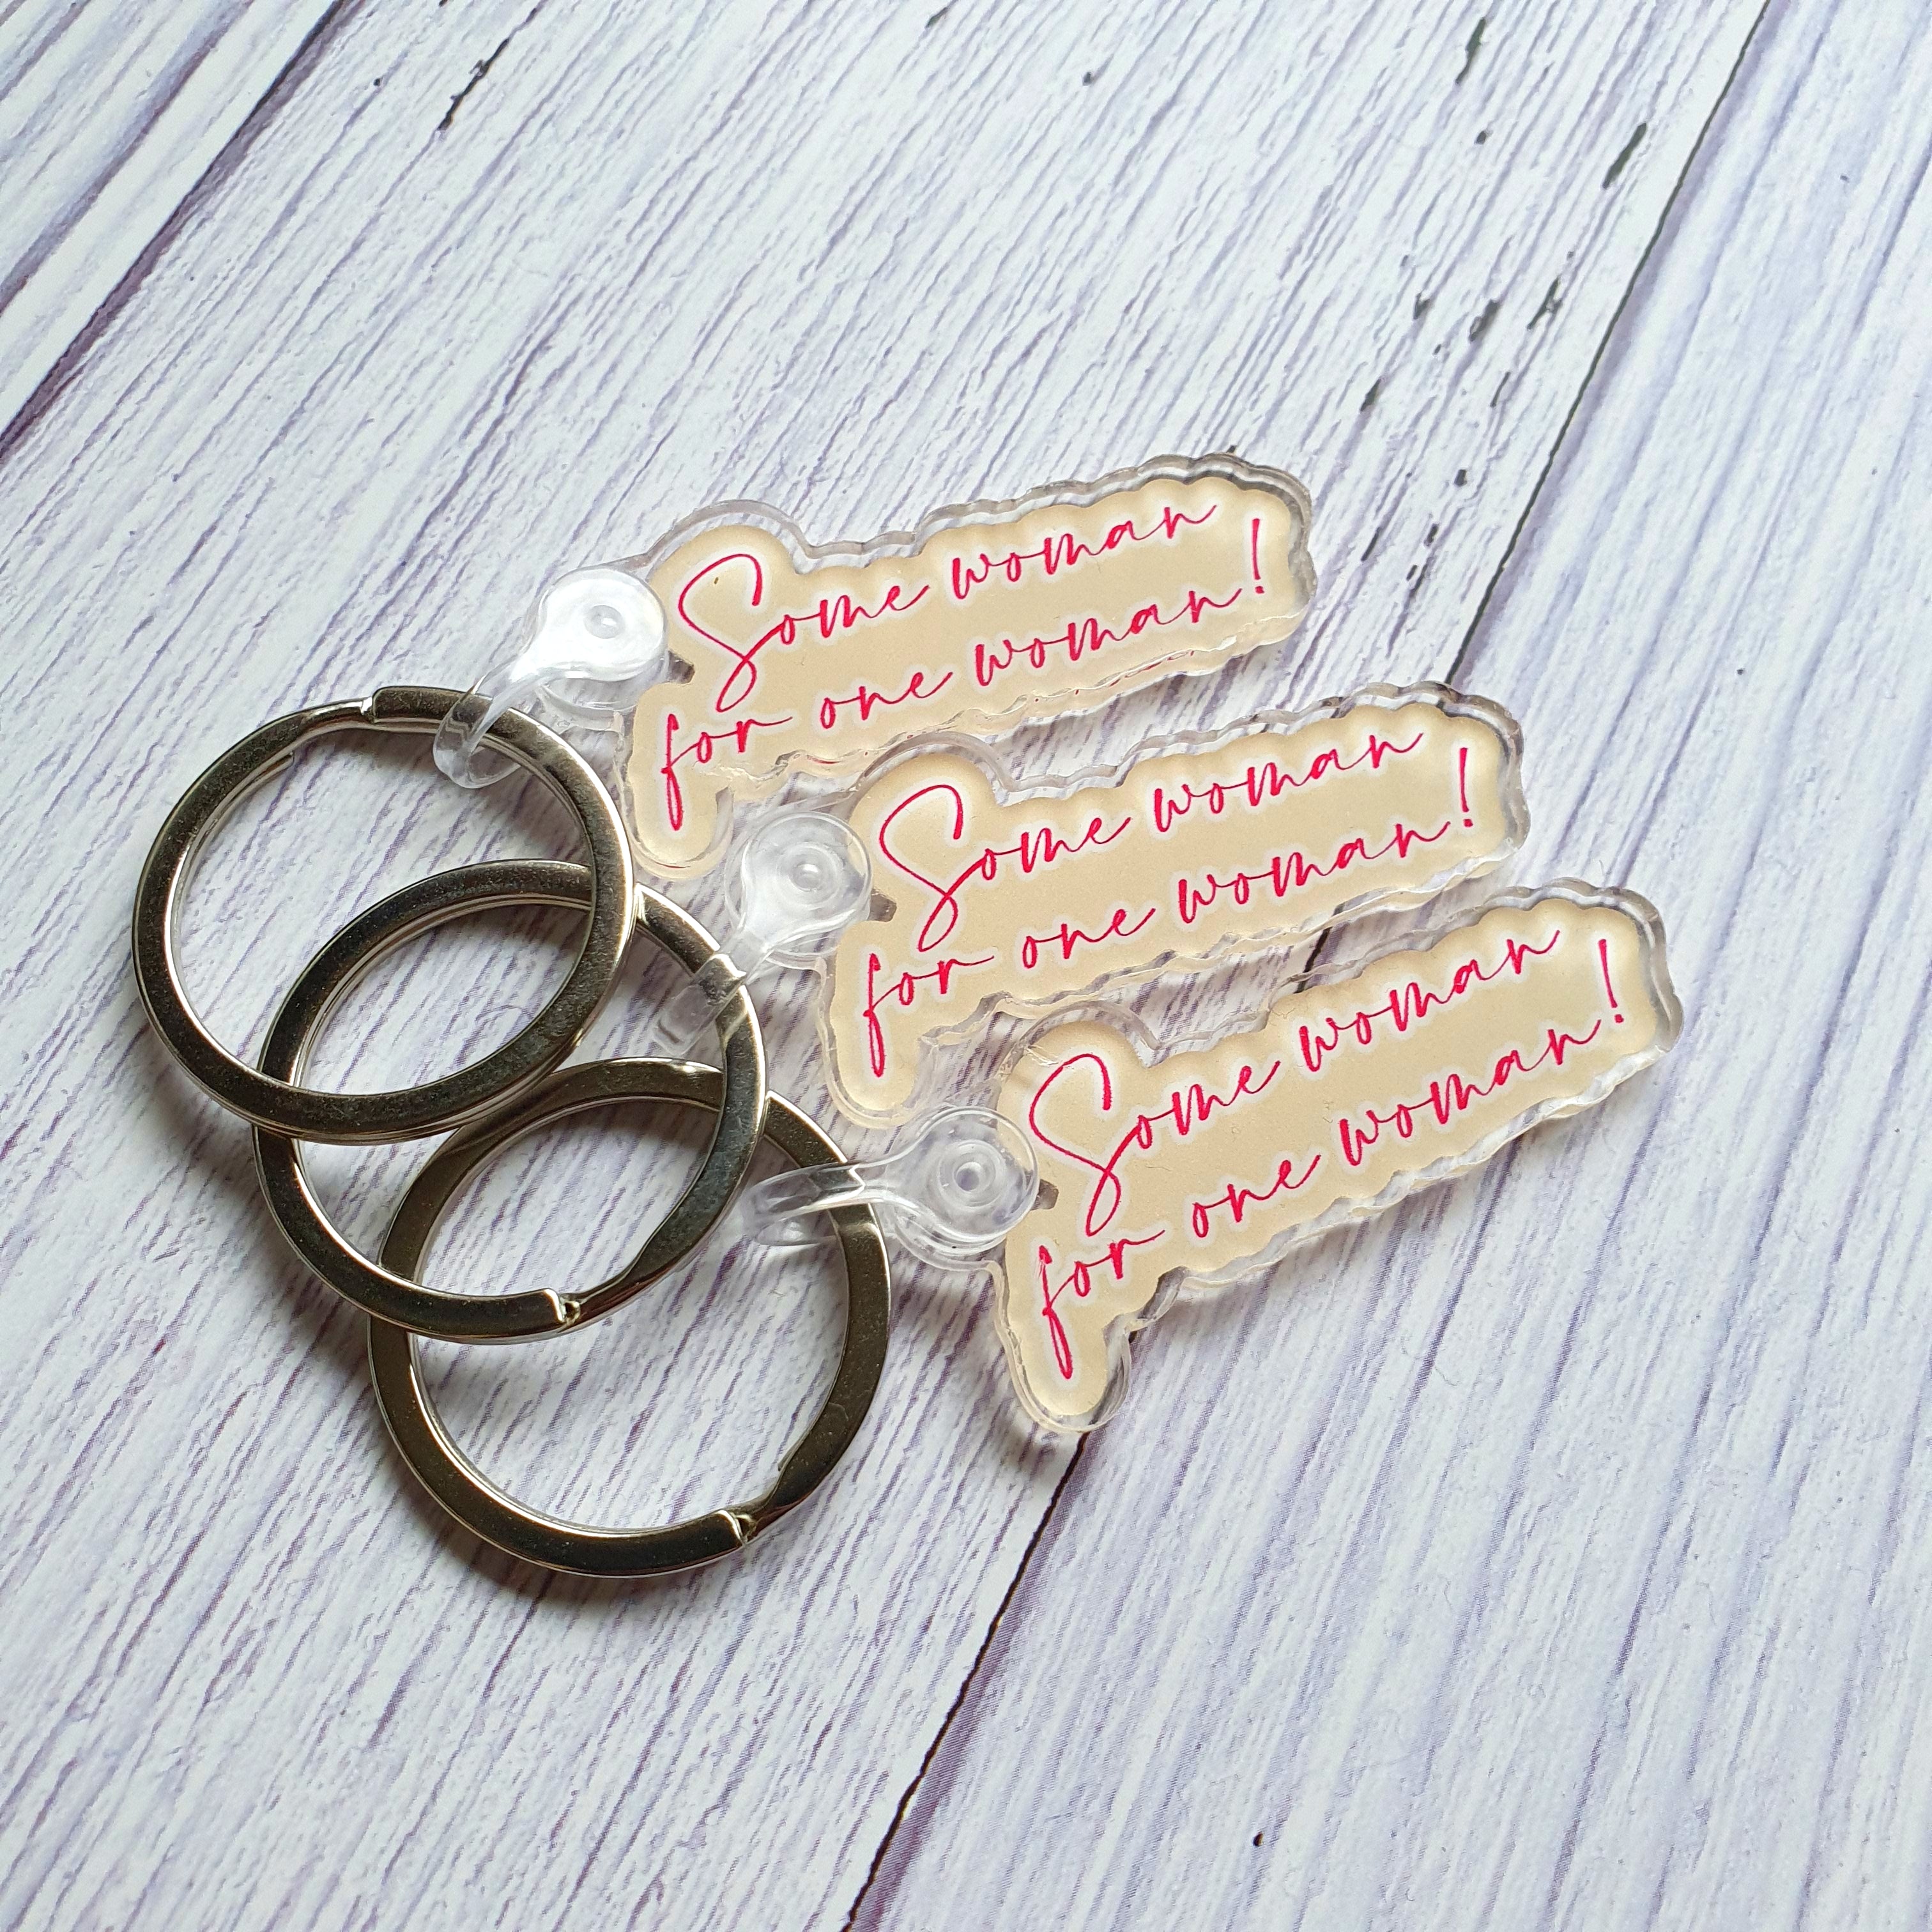 Some Woman - Limited Edition Keychain